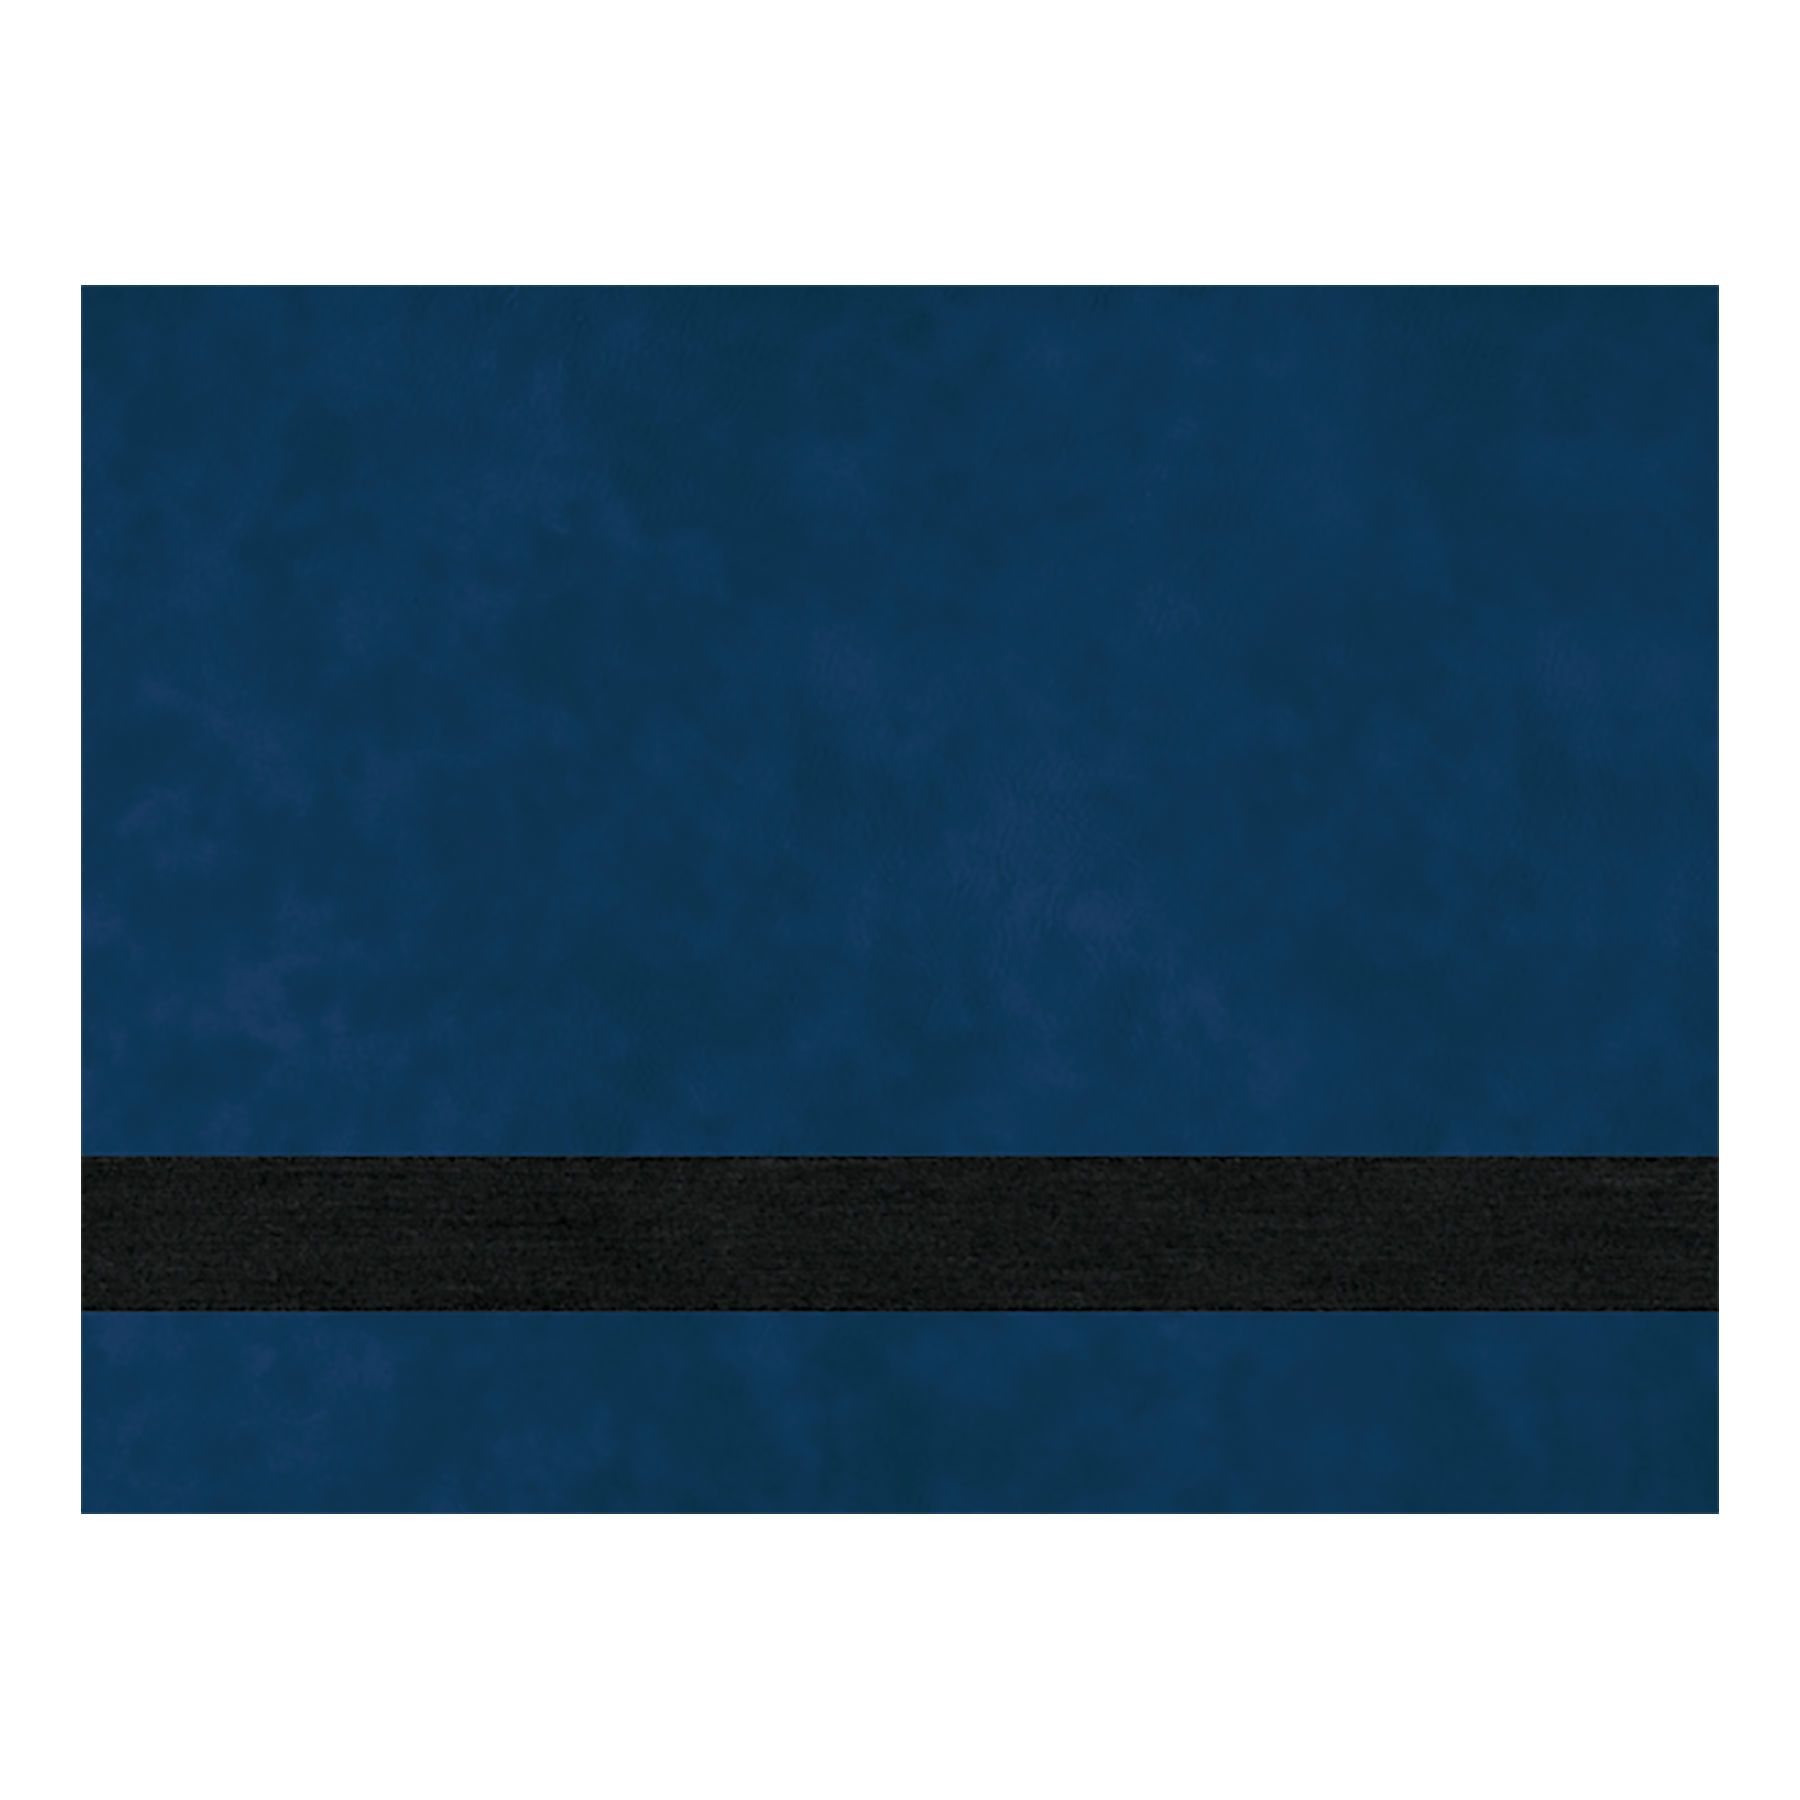 PRE-ORDER! Full Size Laserable Leatherette Sheet Stock, Epilog Fusion Pro Laser Engravers (Available Jan. 2022) Engraving Supplies Craftworks NW Fusion Pro 24 (24" x 24") Blue/Black 